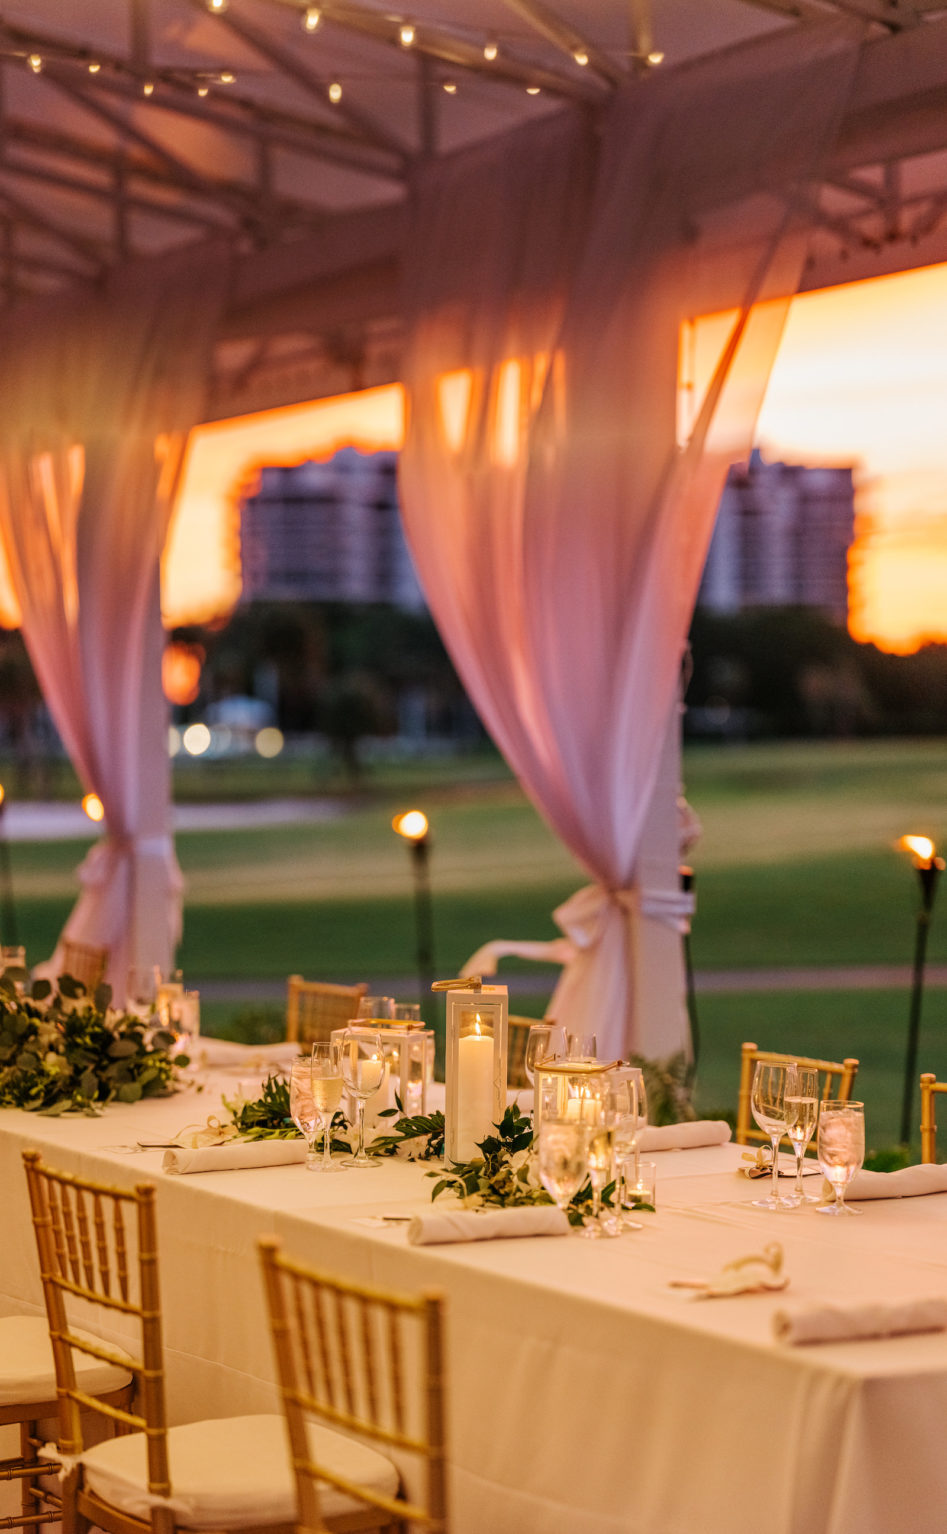 Romantic Elegant Outdoor Courtyard Golf Course Wedding Reception Decor, String Lights, Long Tables with White Linens, Simple Greenery Centerpieces Table Runner, Gold Chiavari Chairs, Candlesticks | Sarasota Waterfront Wedding Venue The Resort at Longboat Key Club